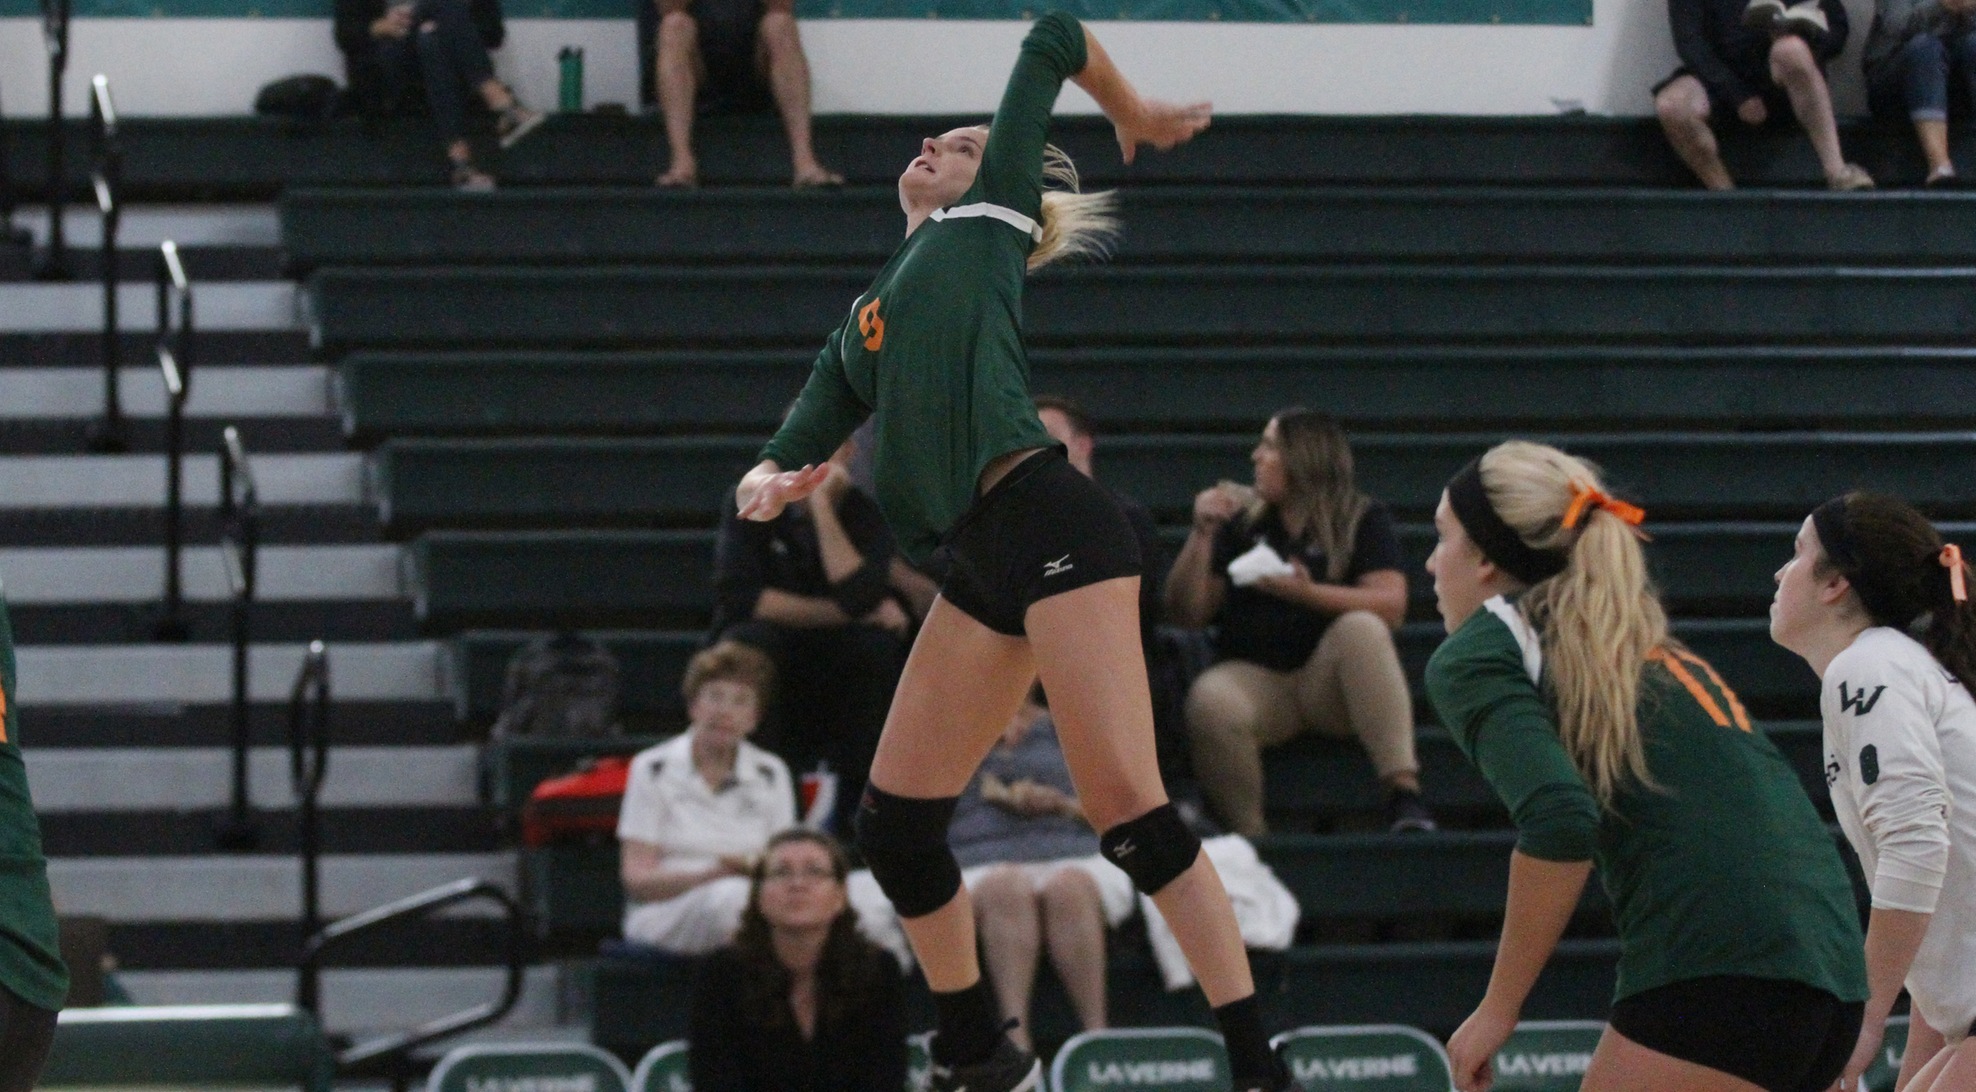 Volleyball ends invite with win